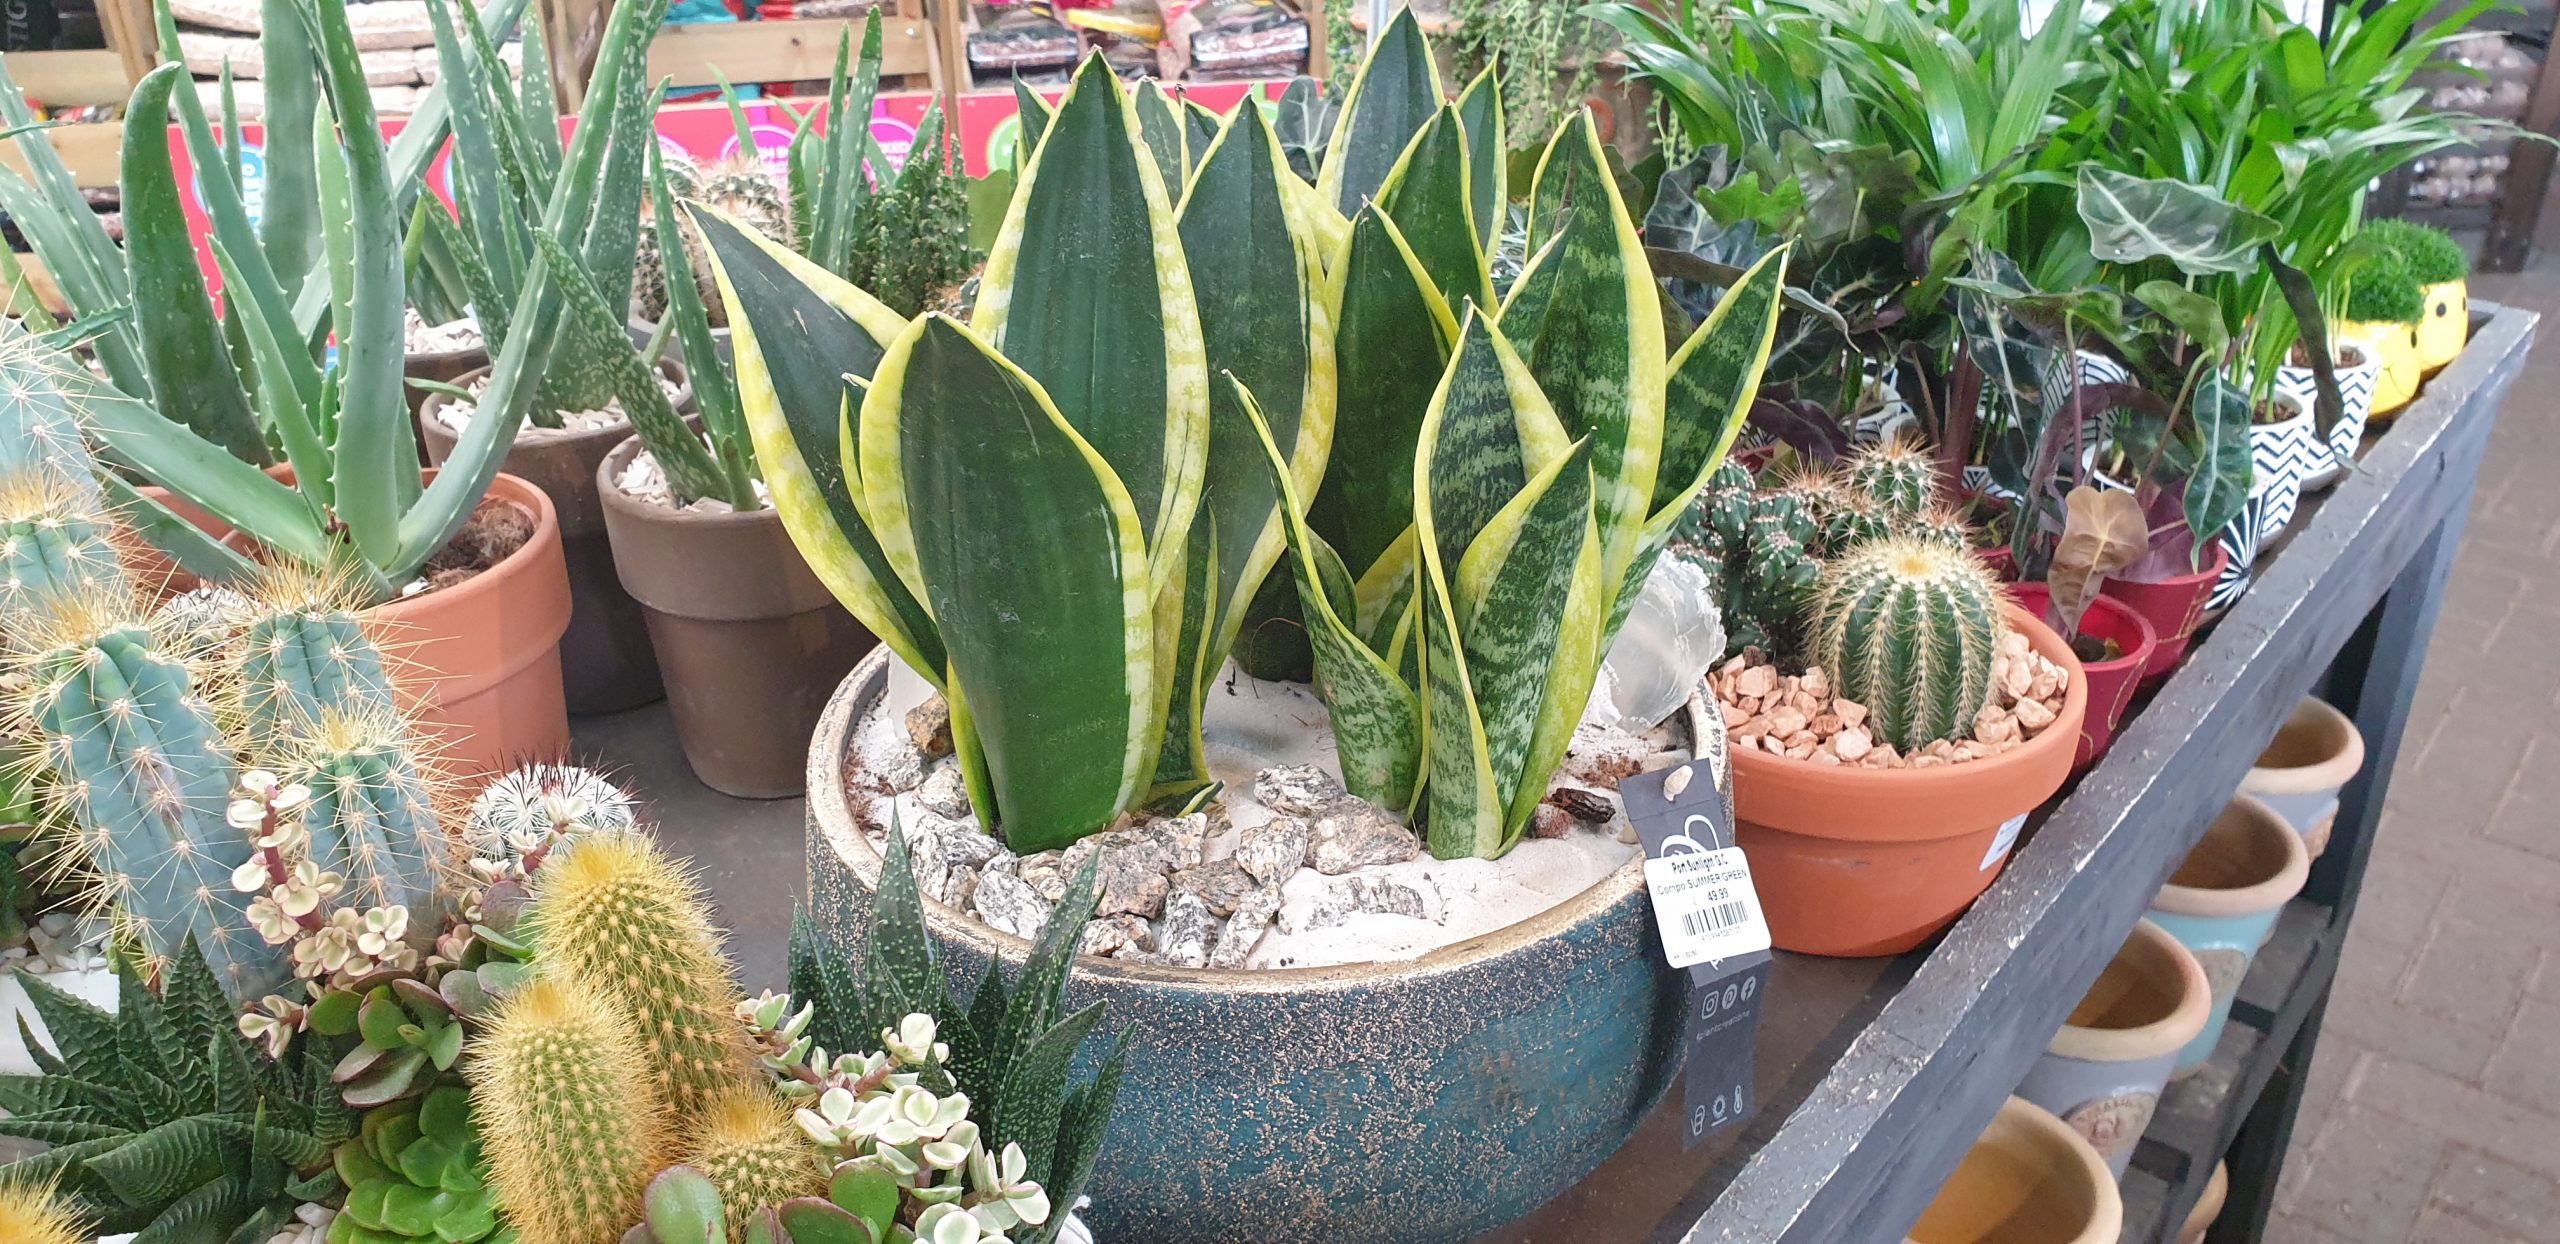 A mothering Laws Tounge plant in a blue bowl